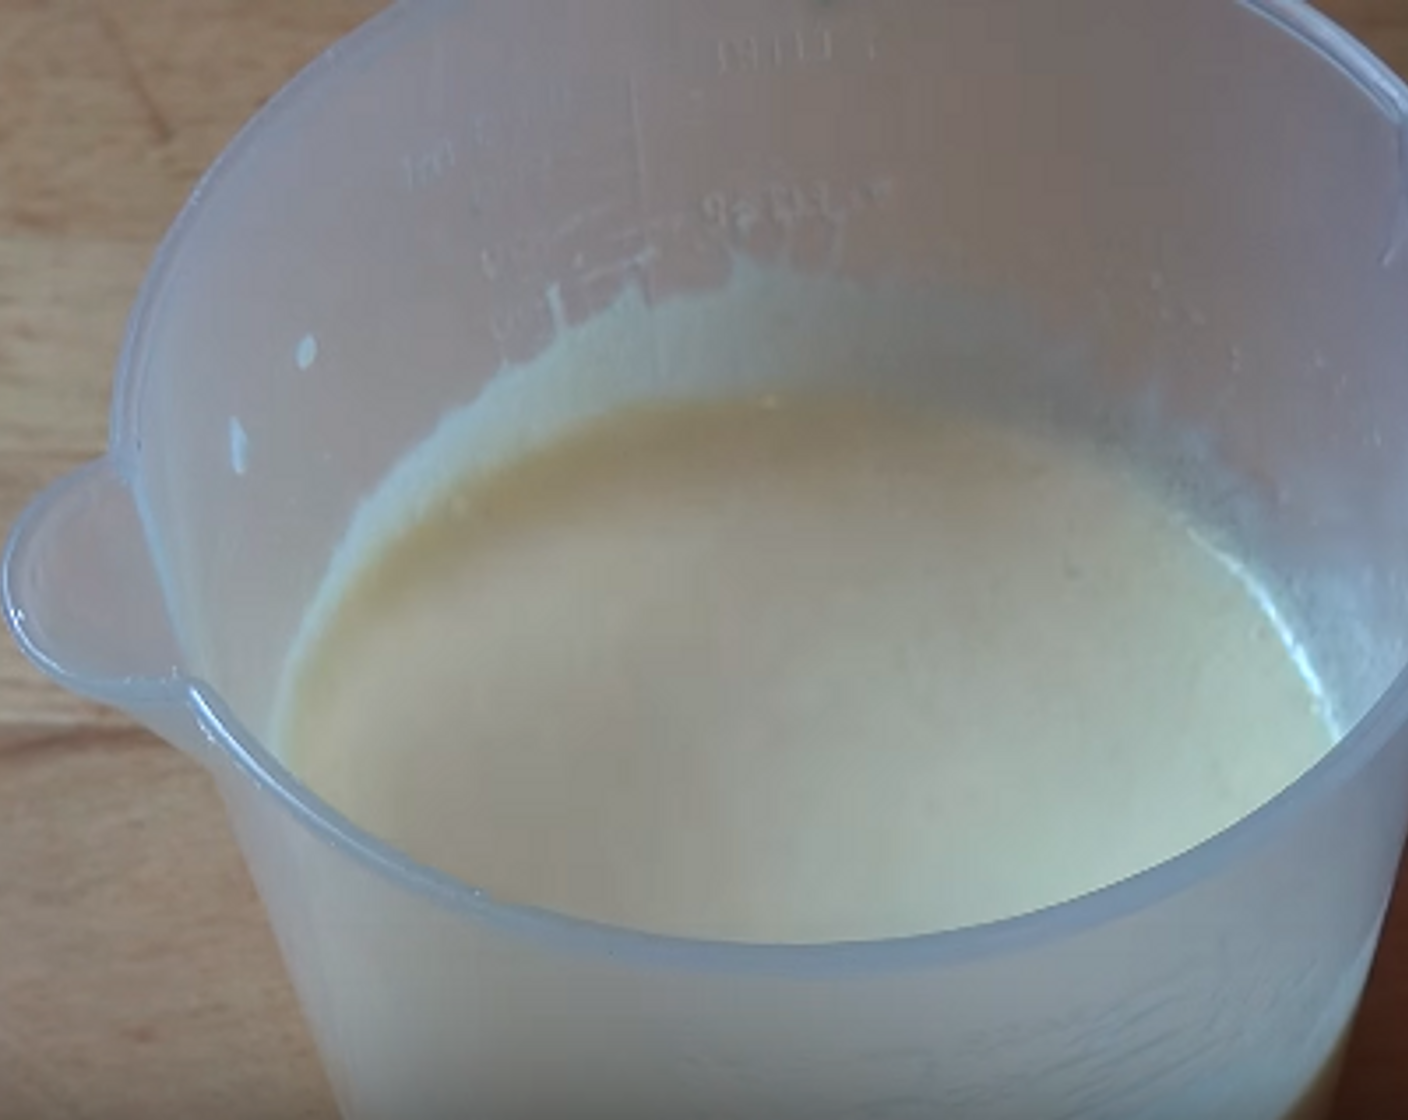 step 2 For the wet ingredients, in a large jug, lightly beat Eggs (2) and add Vegetable Oil (1/2 cup), Buttermilk (1 cup) and Vanilla Extract (1 tsp). Mix together until combined.